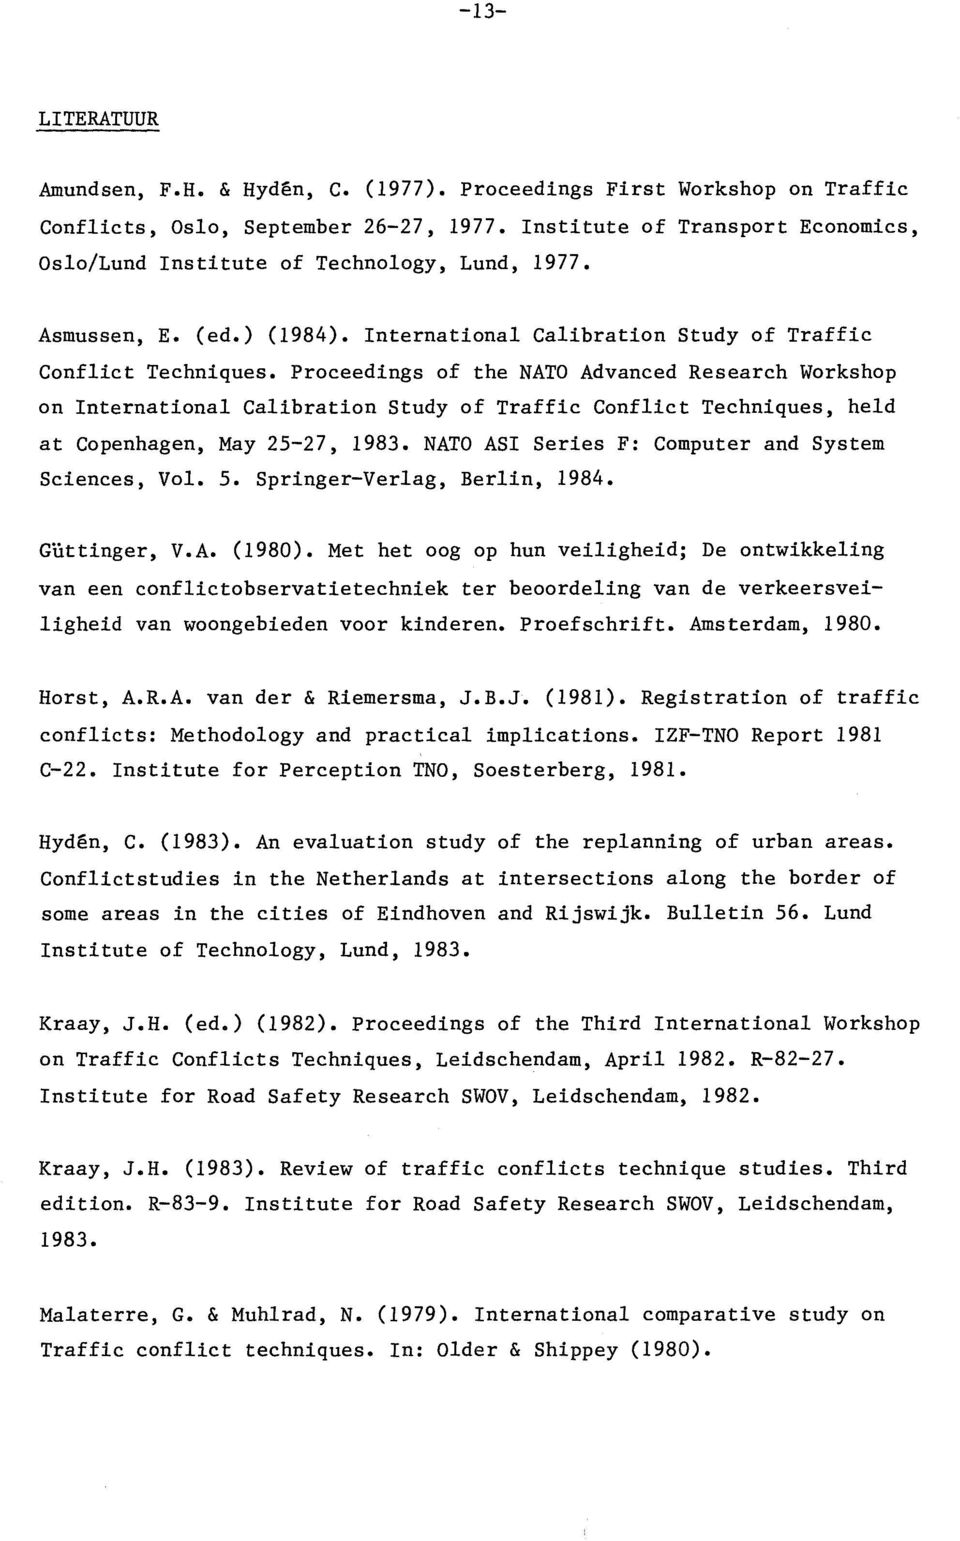 Proceedings of the NATO Advanced Research Workshop on International Calibration Study of Traffic Conflict Techniques, held at Copenhagen, May 25-27, 1983.